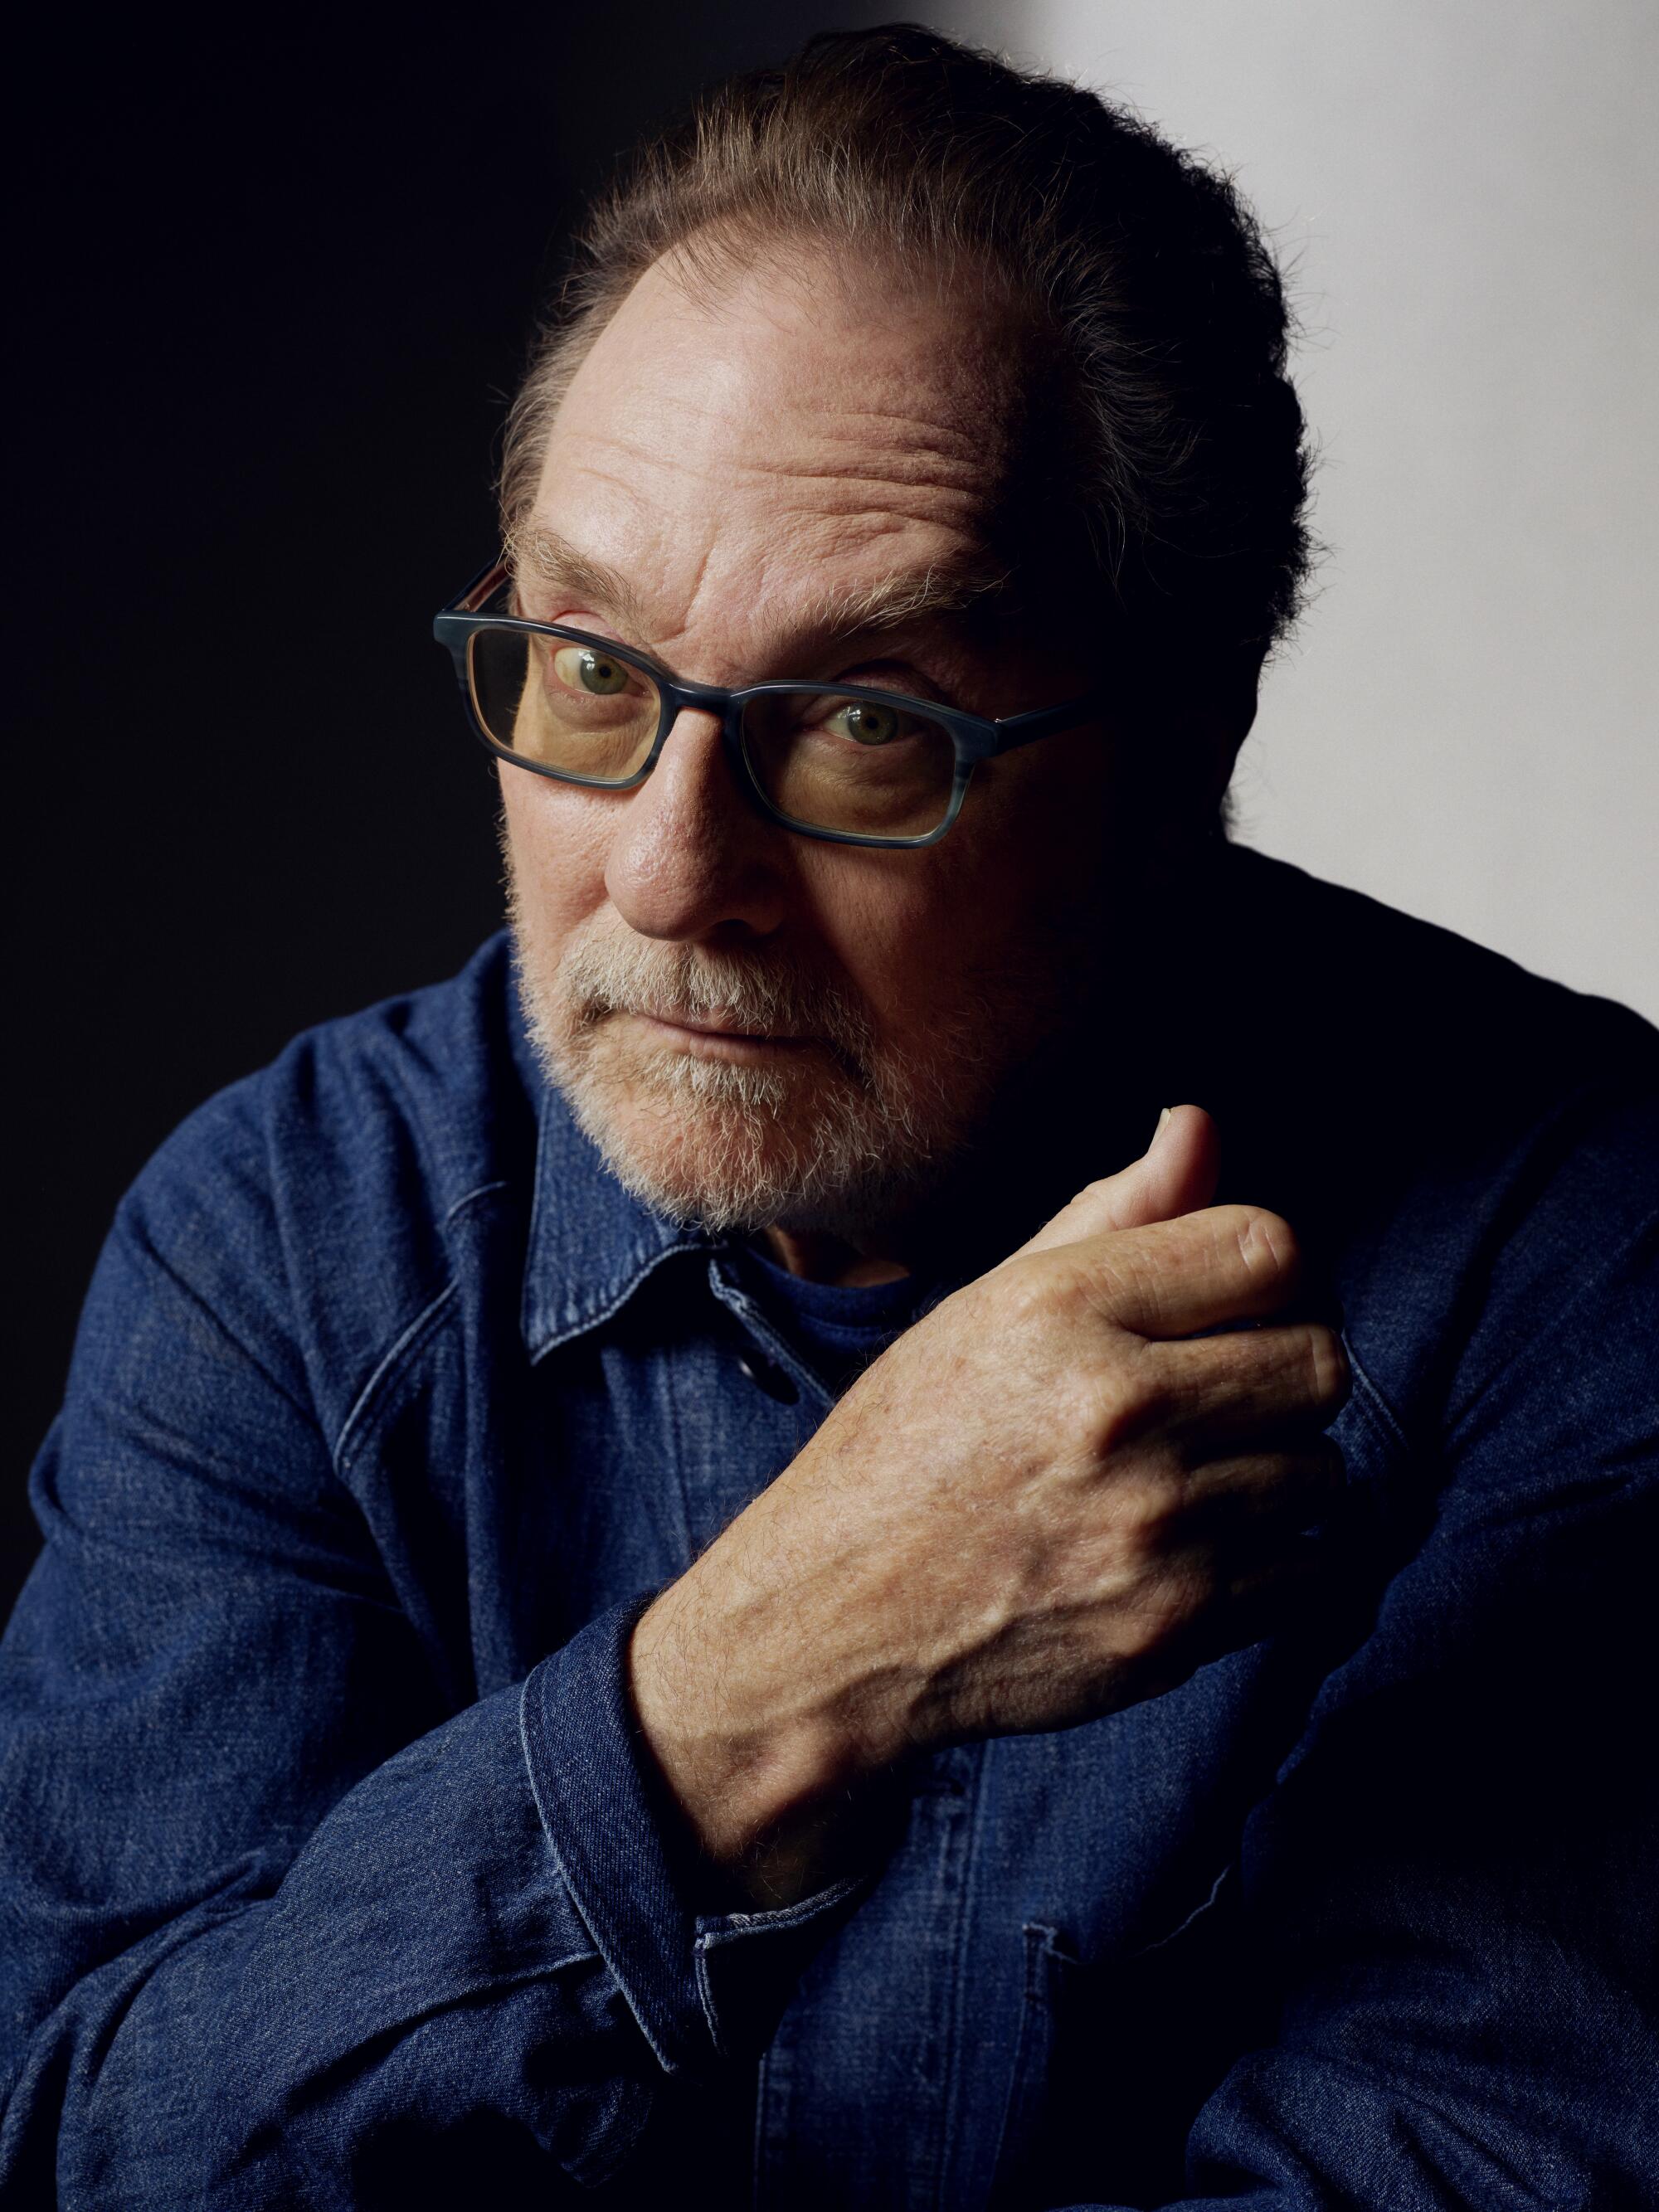 A portrait of Stephen Root wearing glasses